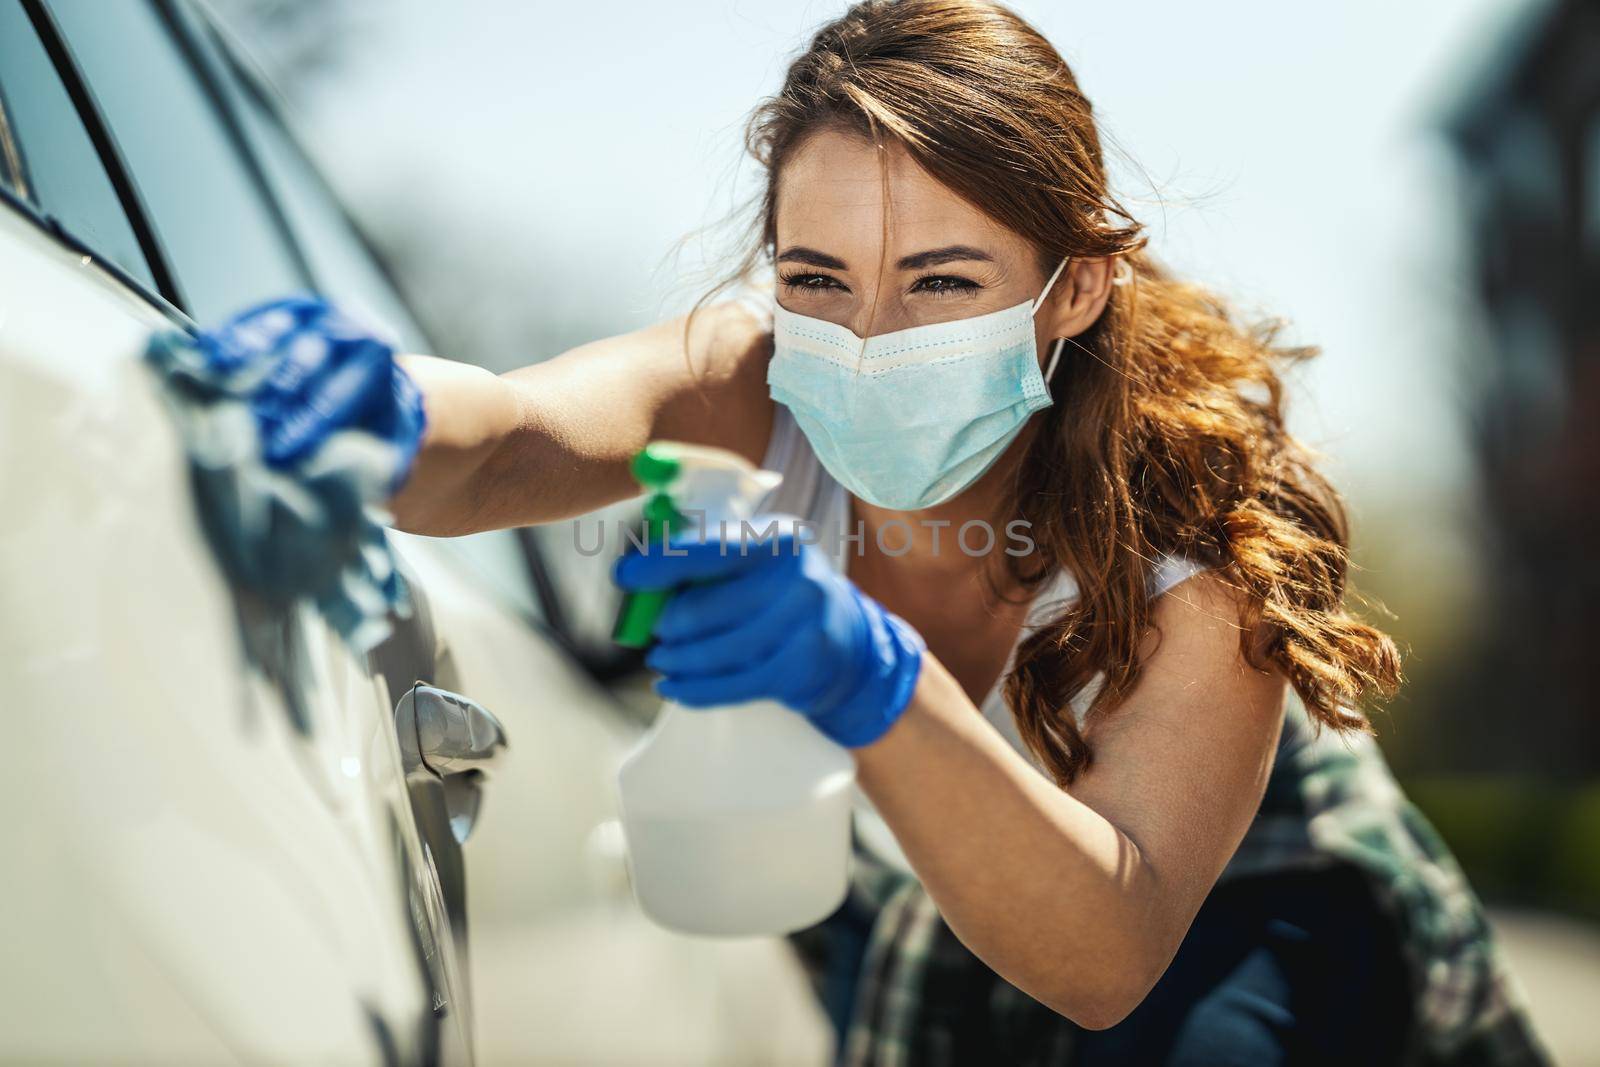 A young woman with a mask on her face and protective gloves on her hands, wipes her car holding a cloth in one and a bottle with disinfectant in the other hand.